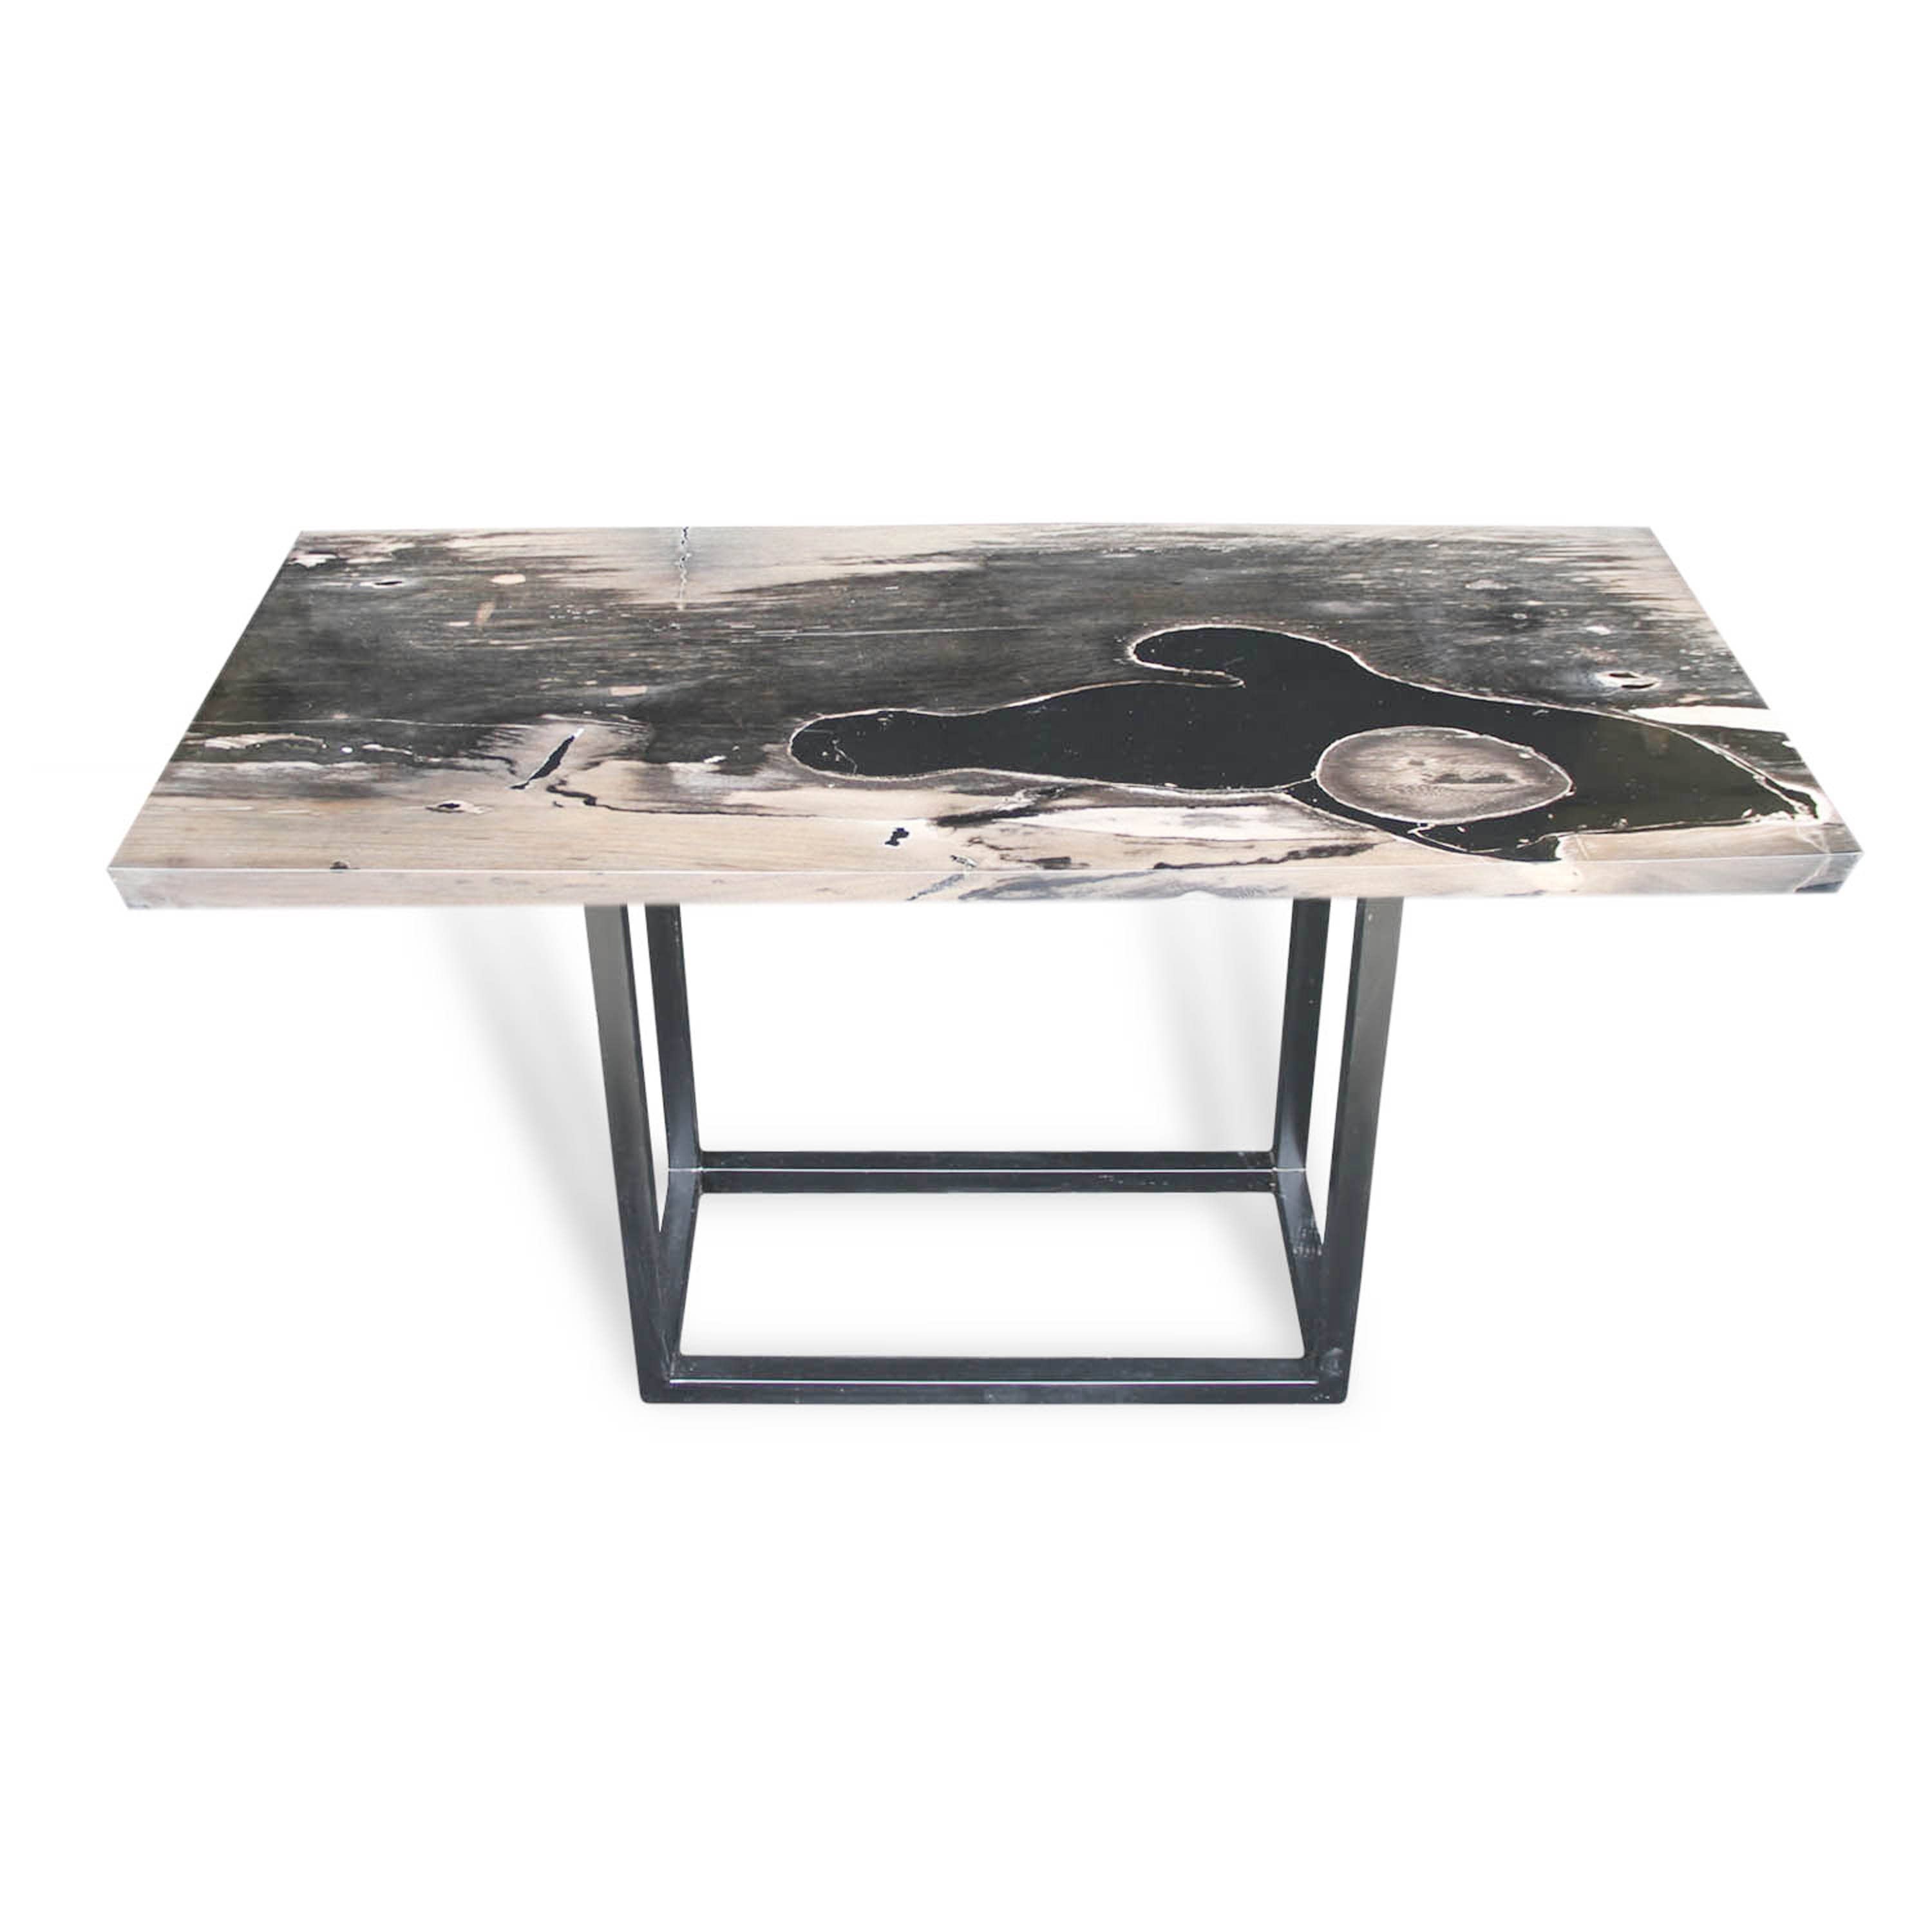 Kalifano Petrified Wood Natural Polished Petrified Wood Console Table from Indonesia - 55" / 163 lbs PWR8900.001